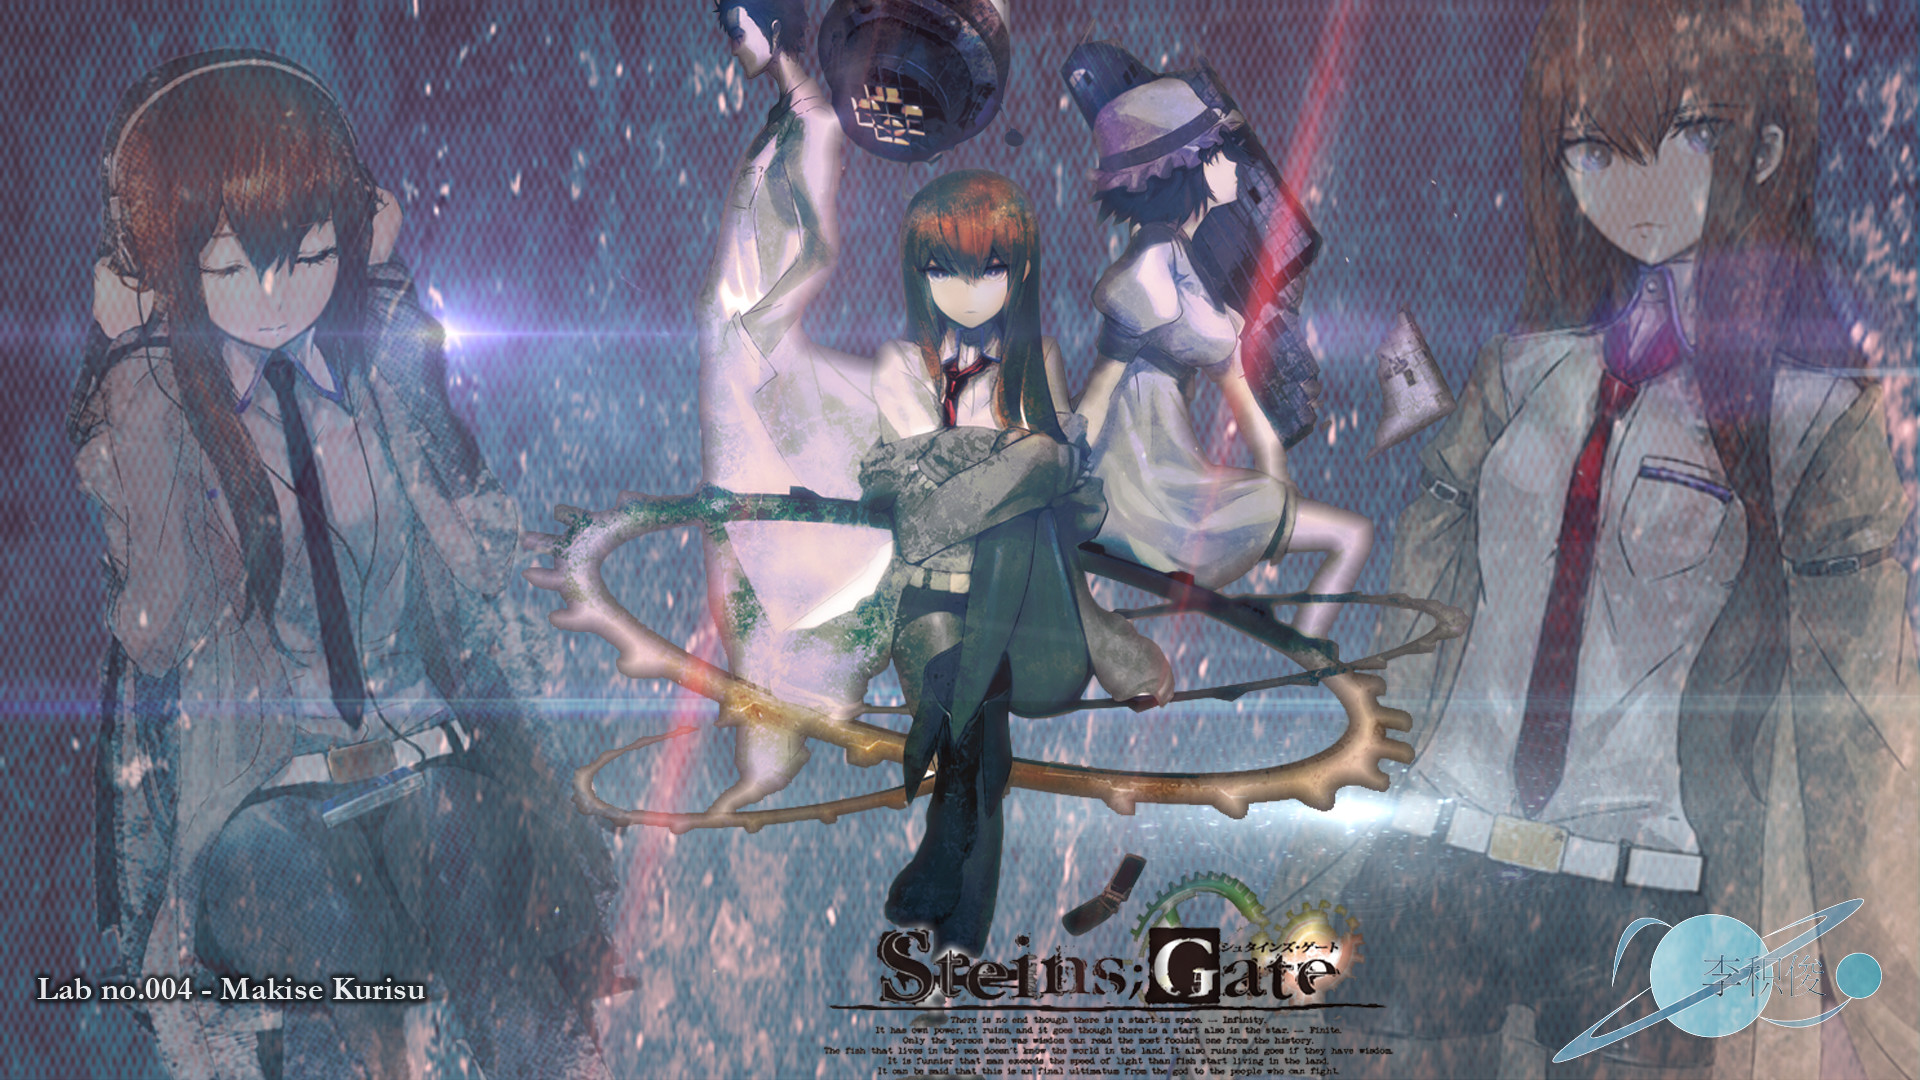 Steins Gate Wallpaper 1080p Images